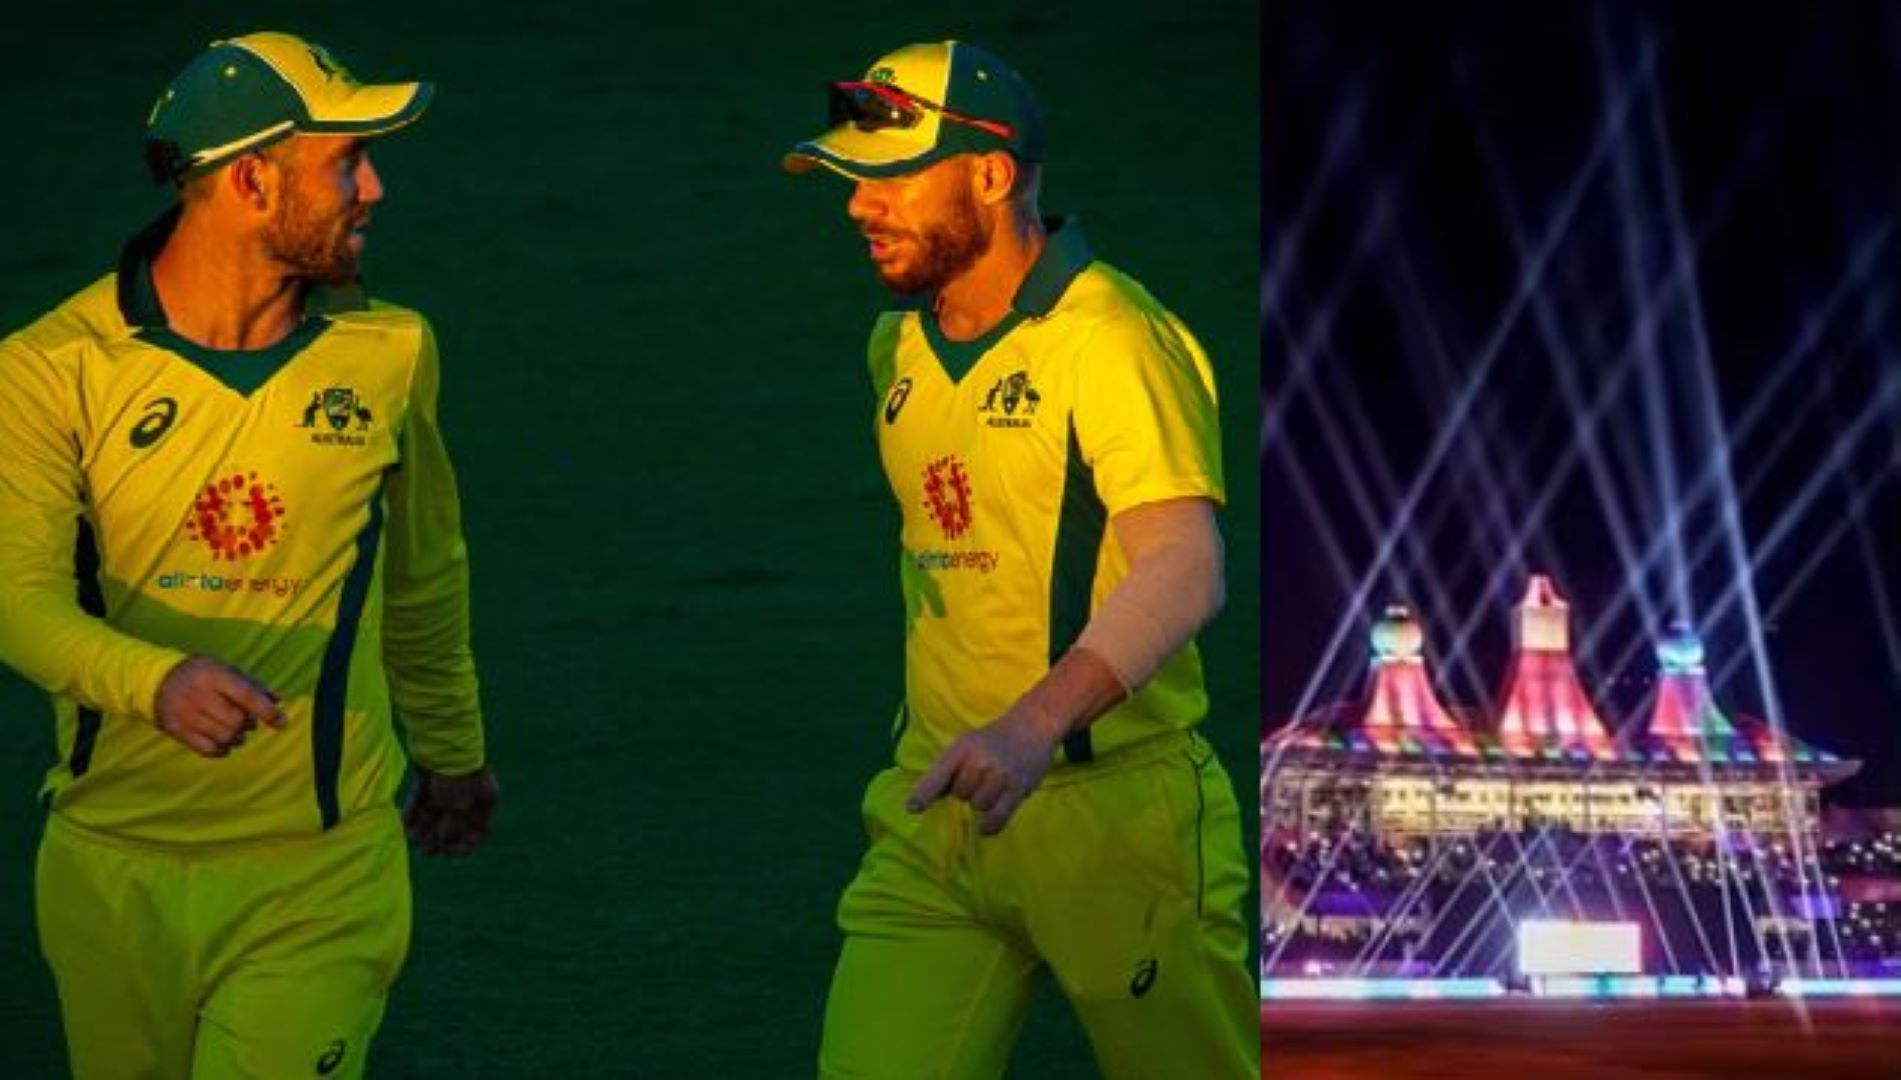 Maxwell and Warner in disagreement over the light show in Delhi